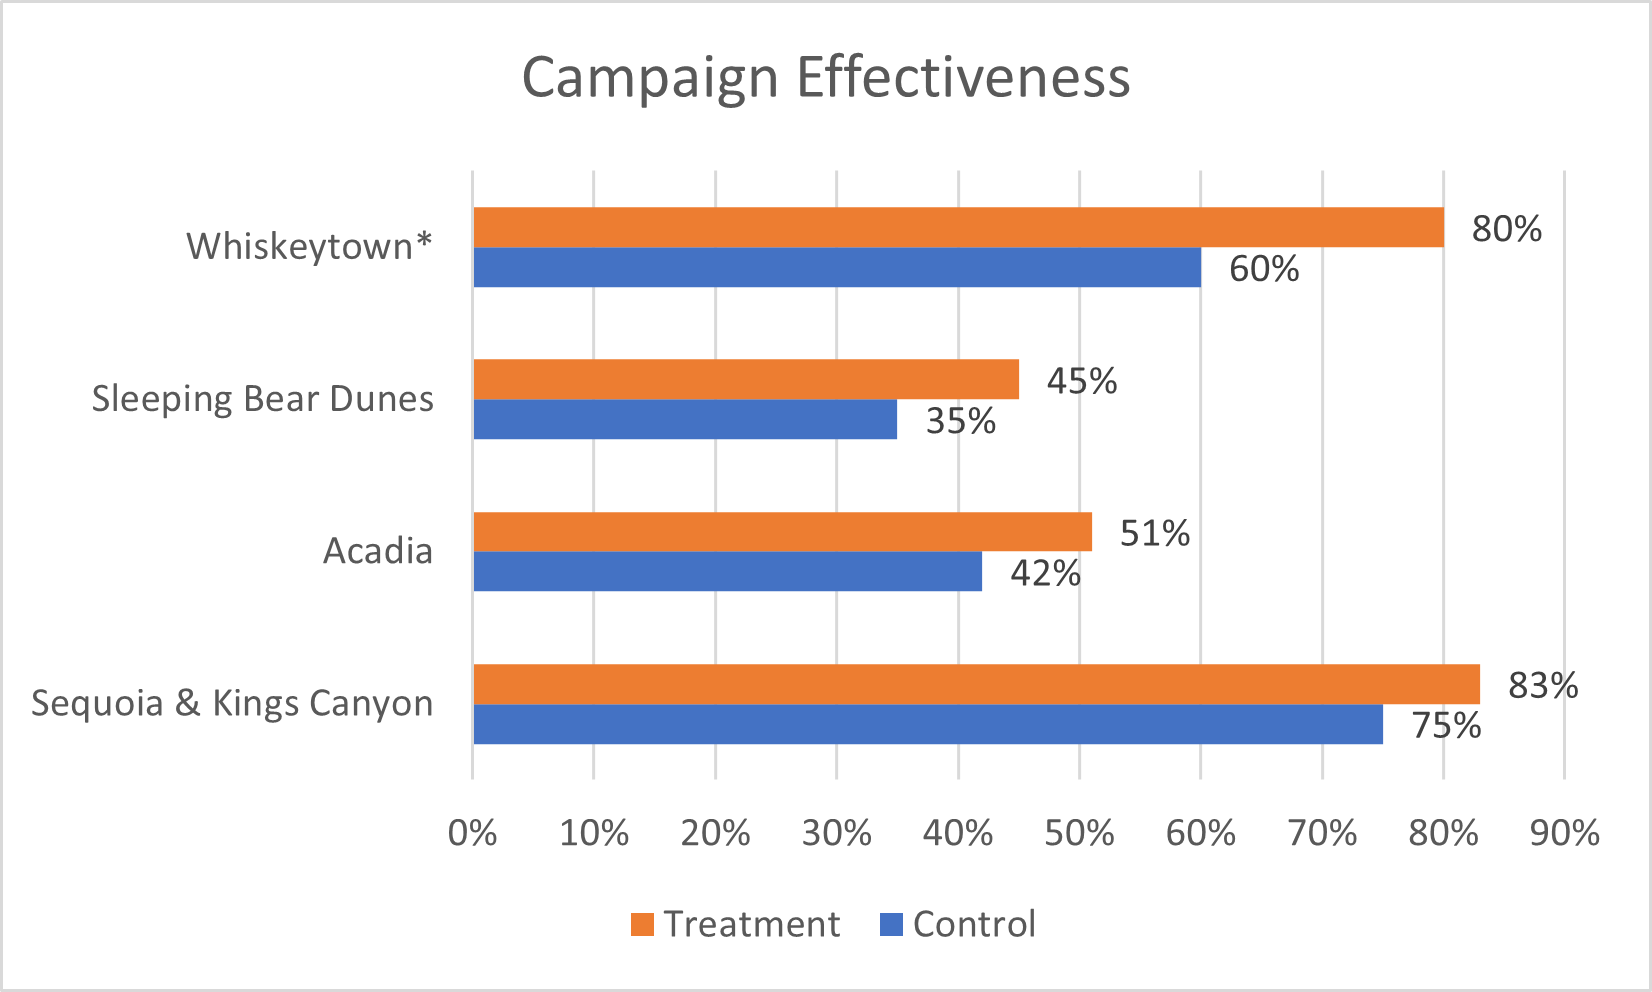 Bar chart displaying the results of the campaign